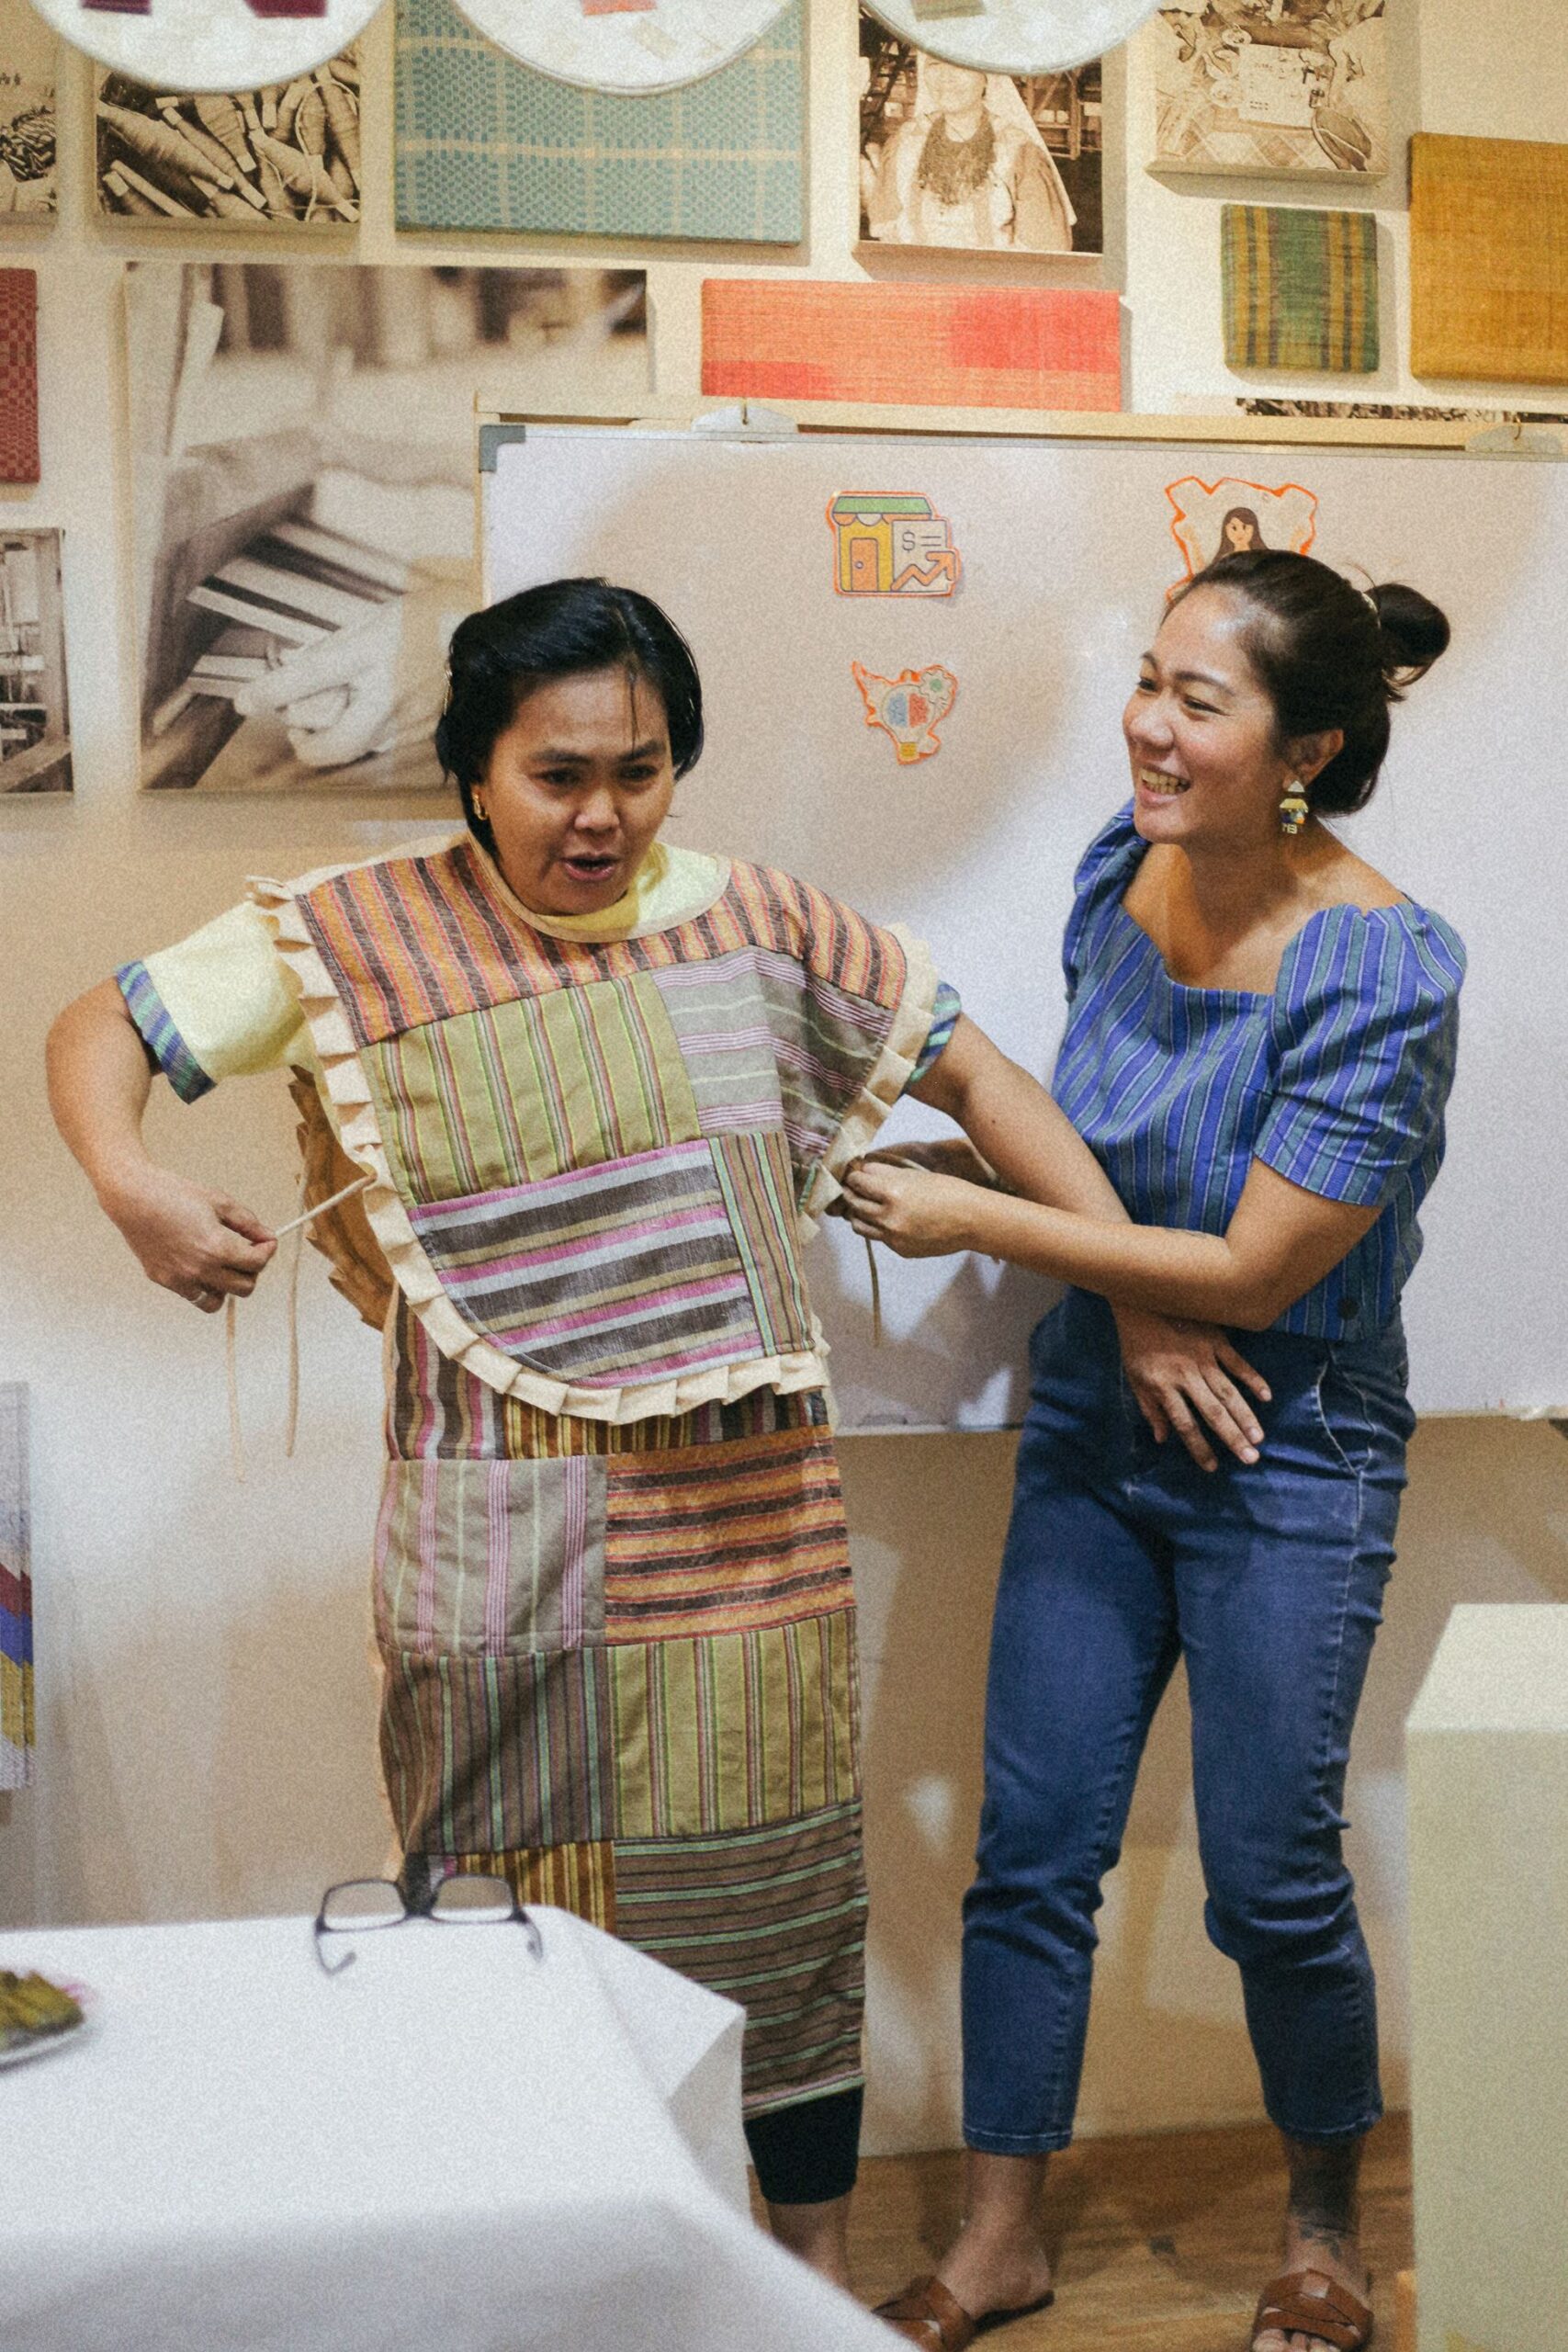 Anya Lim helping out Bayani Artisan and "Master Seamstress" Ate Belen model her creations and rewards for our crowdfunding campaign